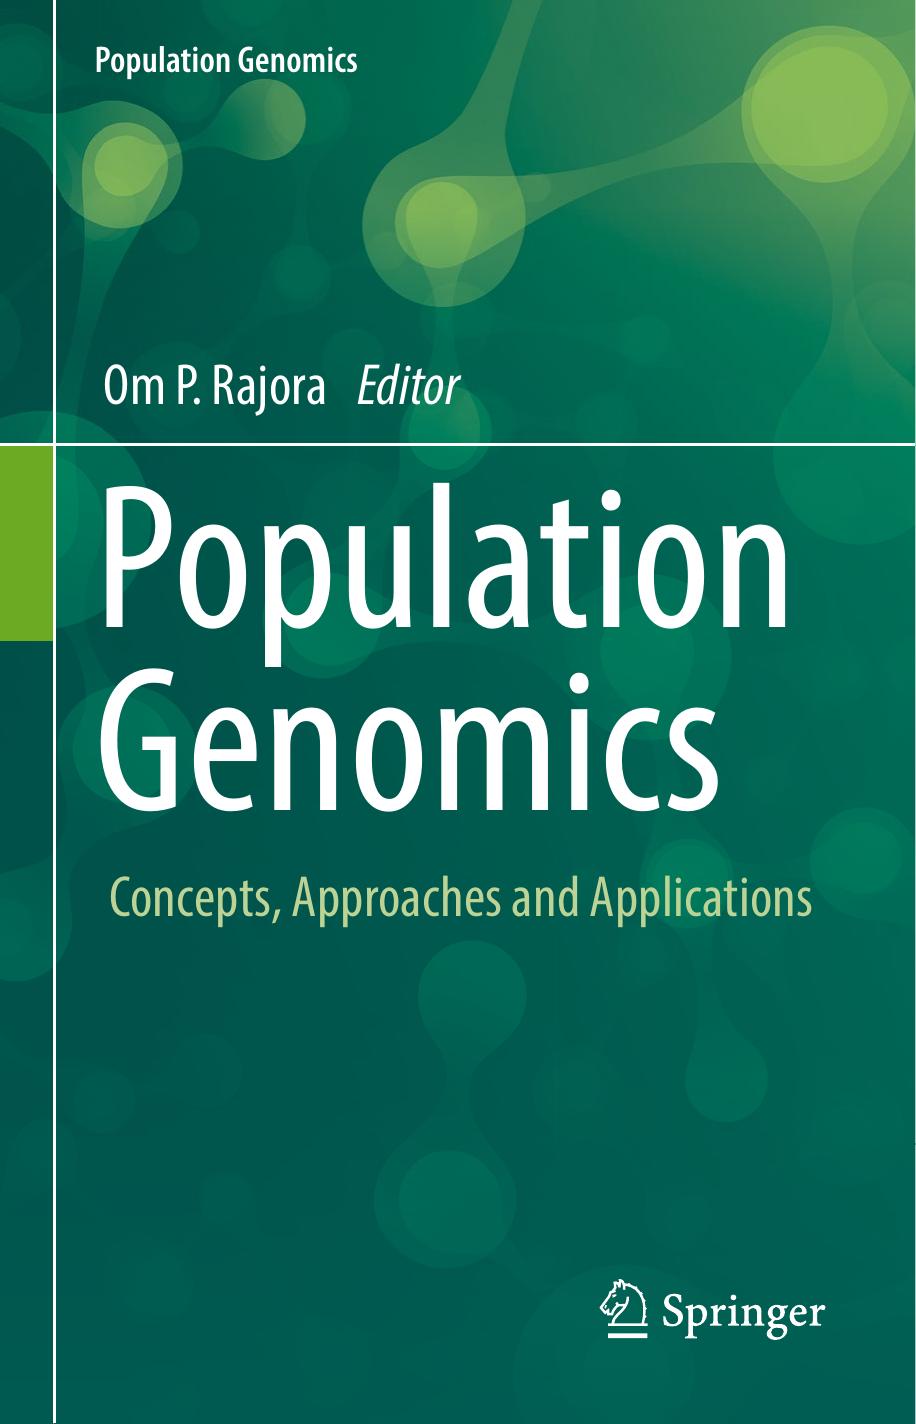 Population Genomics  Concepts, Approaches and Applications 2019